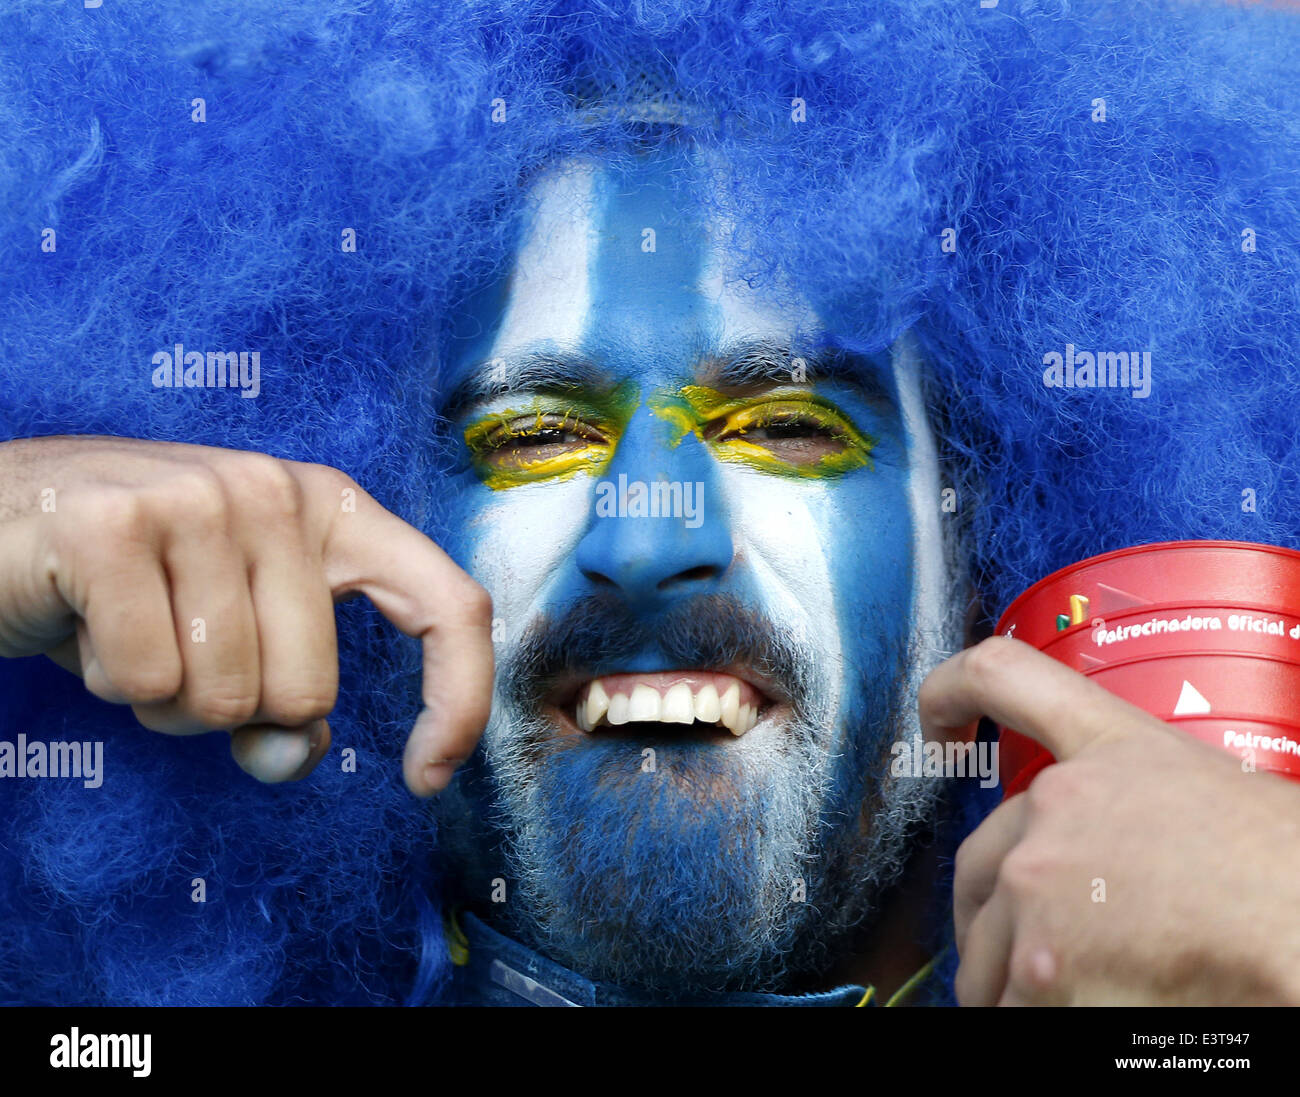 Rio De Janeiro, Brazil. 28th June, 2014. A supporter of Uruguay poses before a Round of 16 match between Colombia and Uruguay of 2014 FIFA World Cup at the Estadio do Maracana Stadium in Rio de Janeiro, Brazil, on June 28, 2014. Colombia won 2-0 over Uruguay and qualified for Quarter-finals on Saturday. Credit:  Wang Lili/Xinhua/Alamy Live News Stock Photo